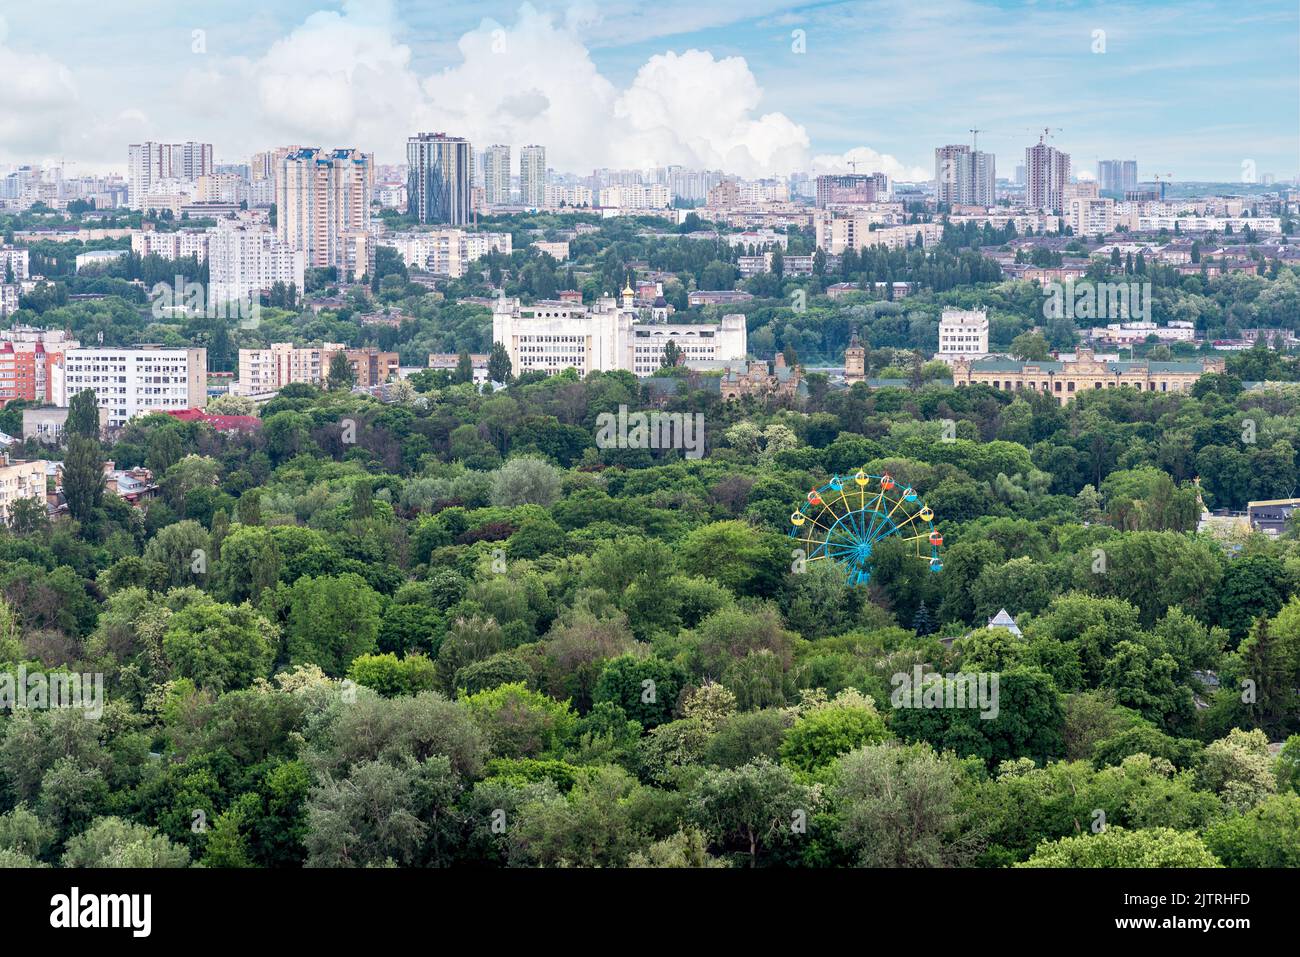 Kyiv cityscape with green area and old ferris wheel on foreground Stock Photo